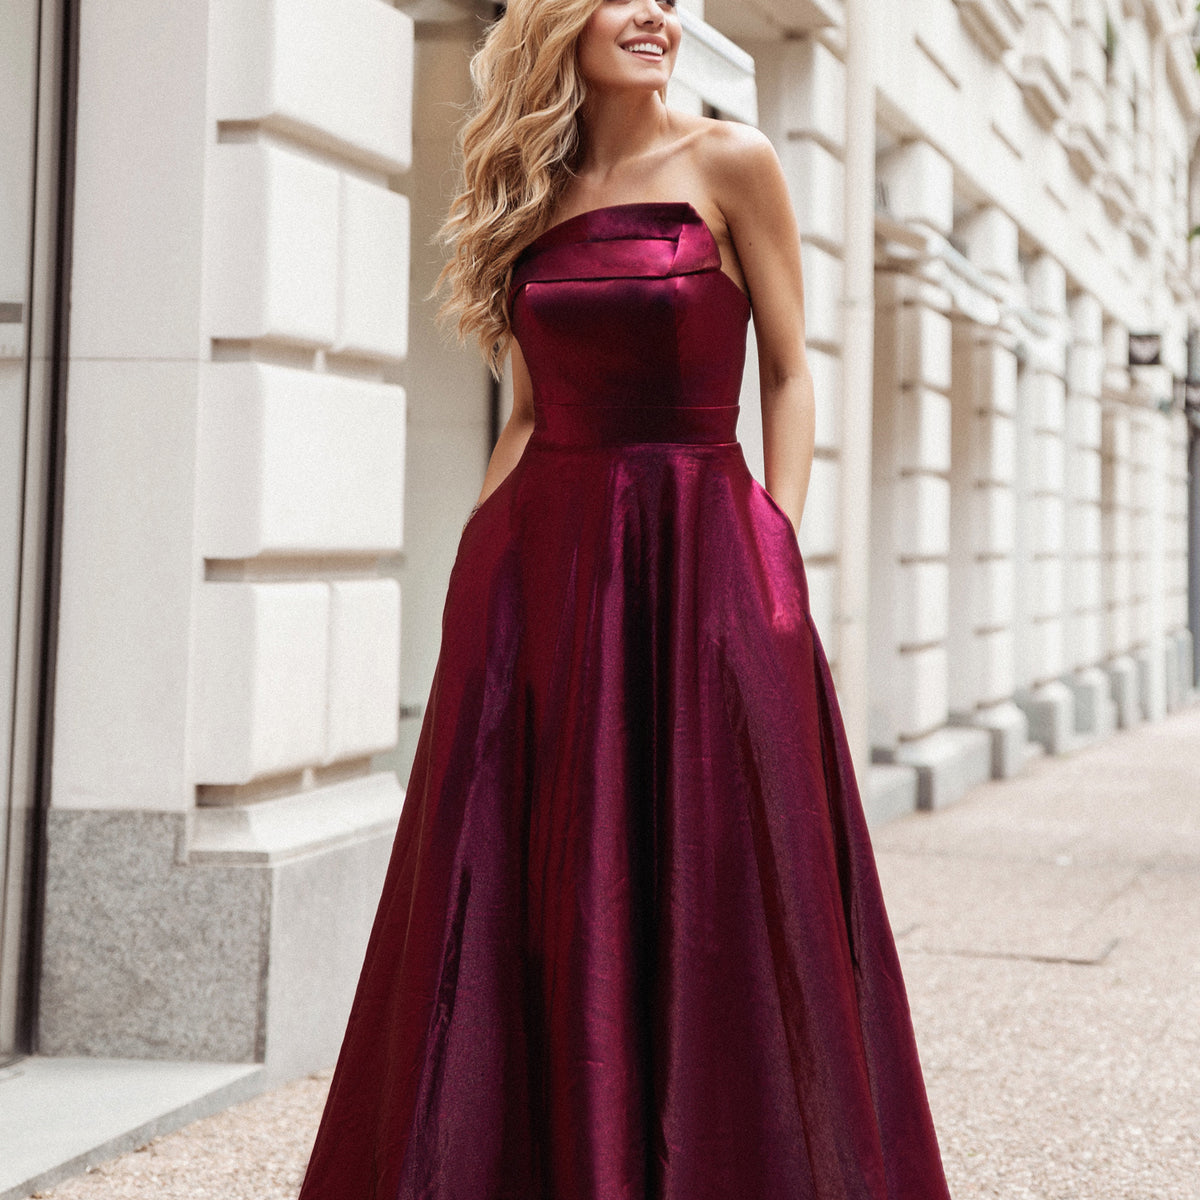 Tina Holly Couture TE003 Berry Pink Satin Silky Formal Dress